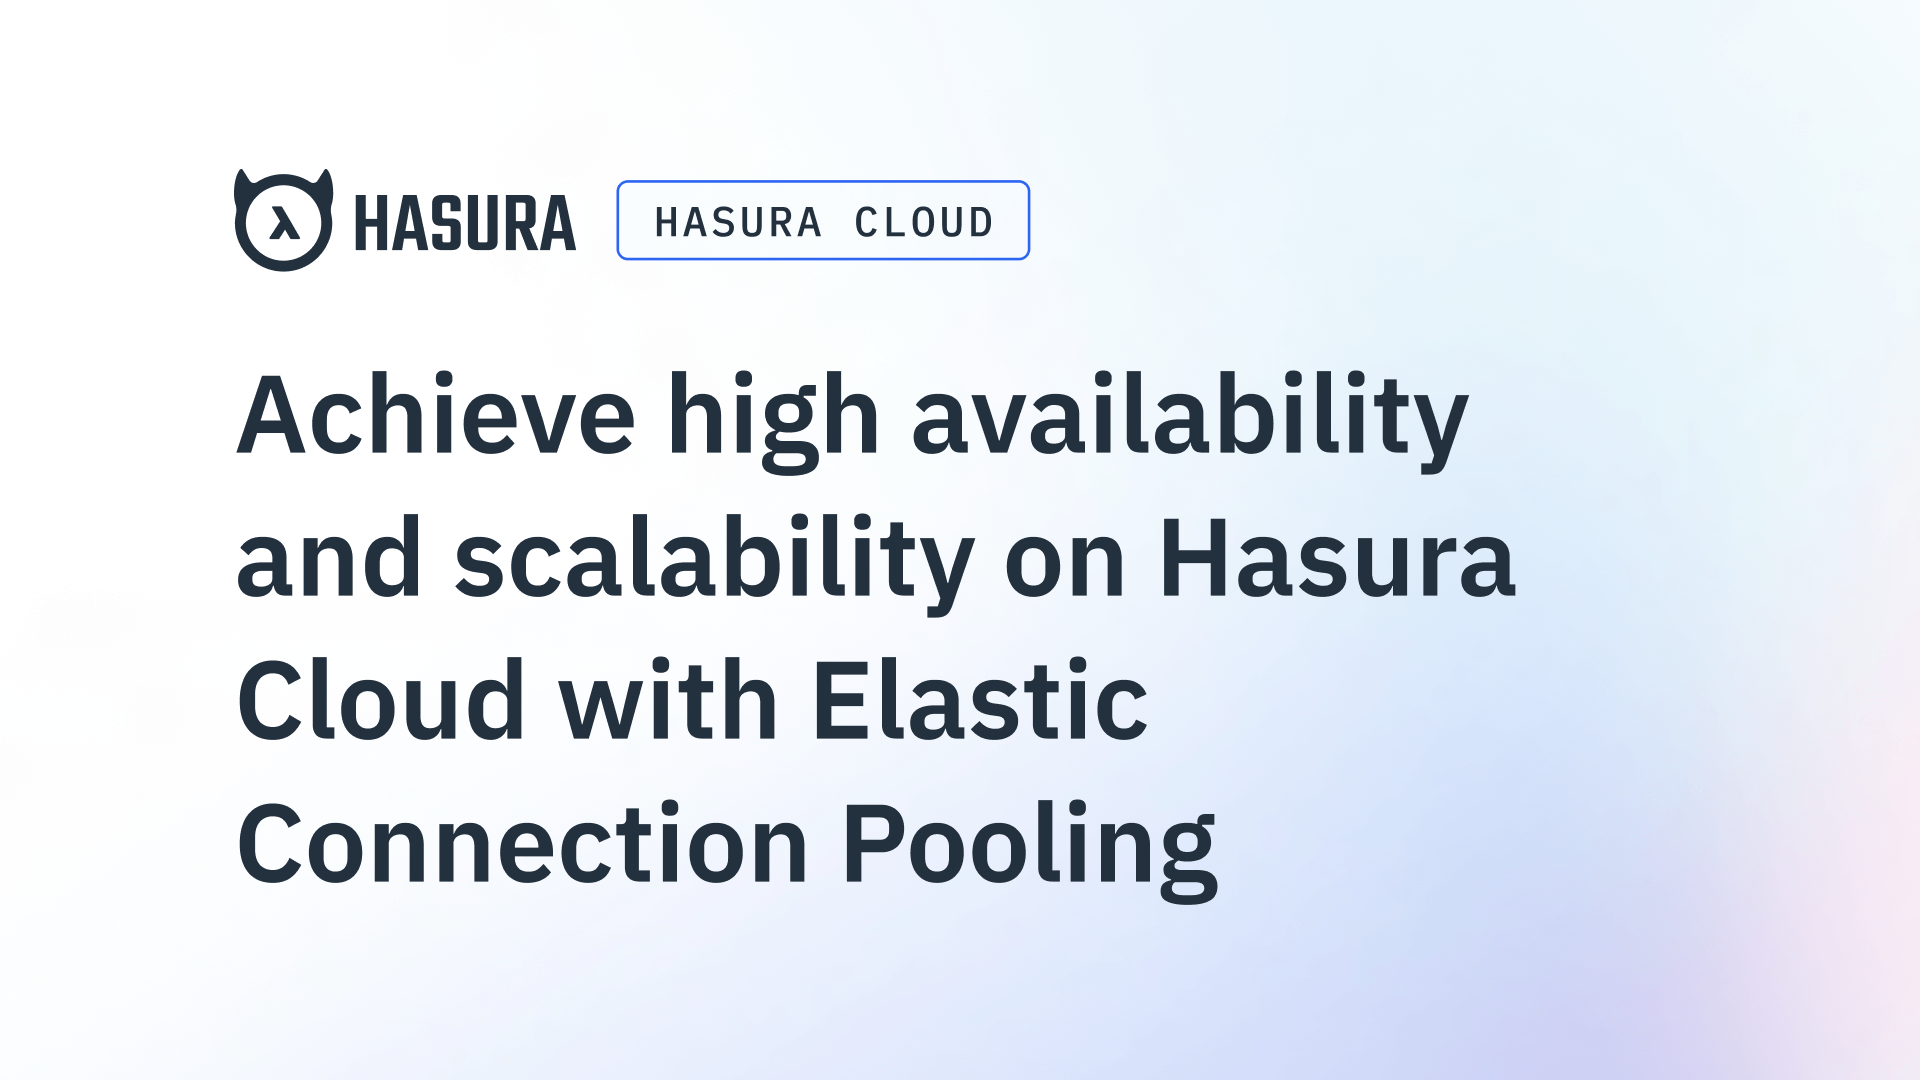 Achieve high availability and scalability on Hasura Cloud with Elastic Connection Pooling